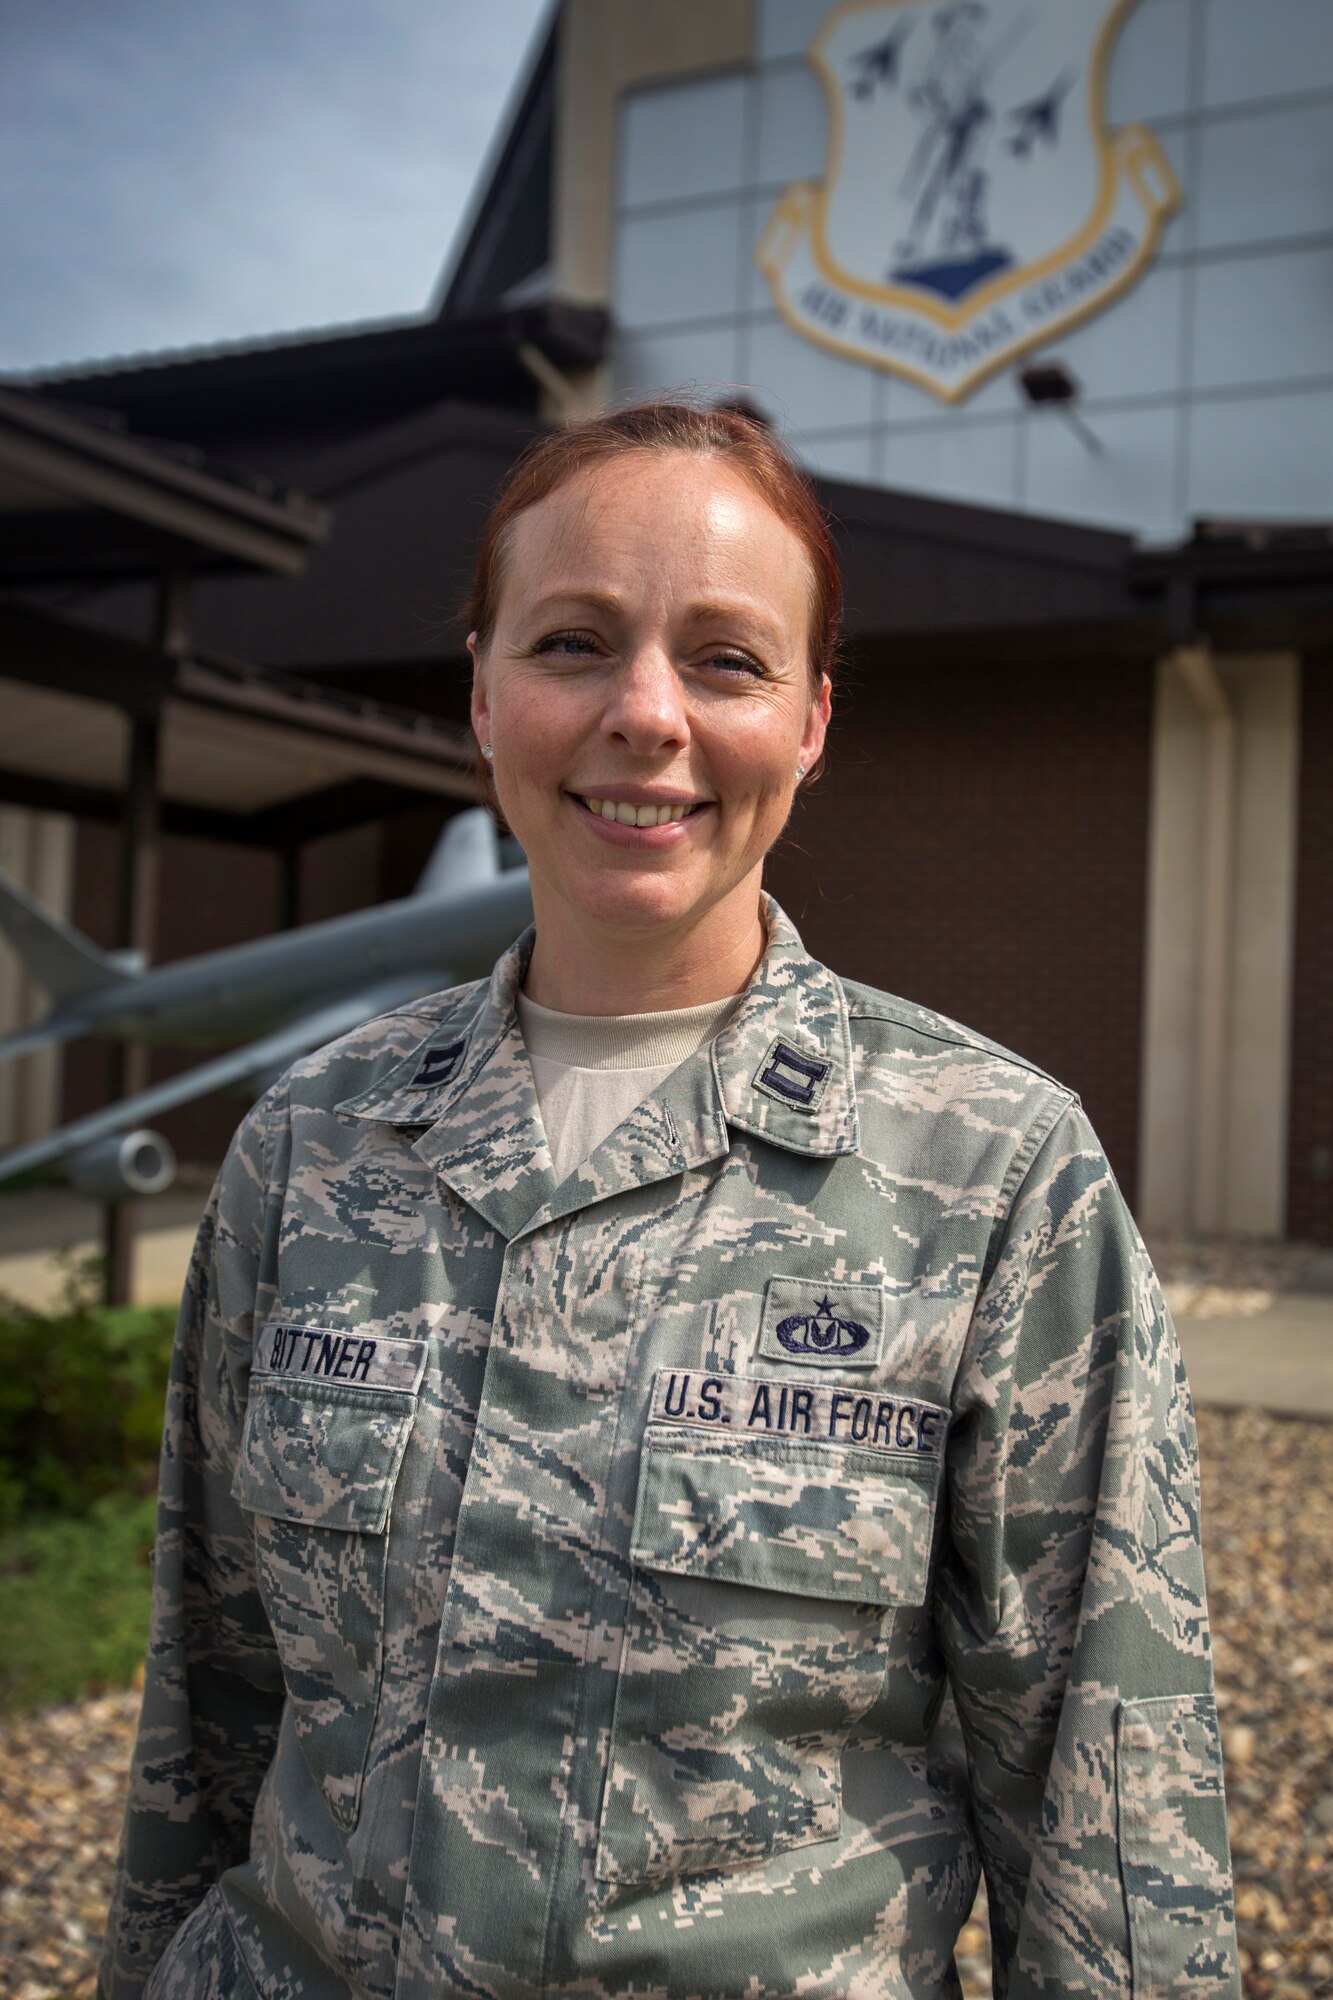 Hospice volunteer Capt. Felicia M. Bittner, is a Senior Intelligence Officer with the 108th Operations Support Squadron, New Jersey Air National Guard, at Joint Base McGuire-Dix-Lakehurst, N.J., Sept. 21, 2016. (U.S. Air National Guard photo by Master Sgt. Mark C. Olsen/Released)